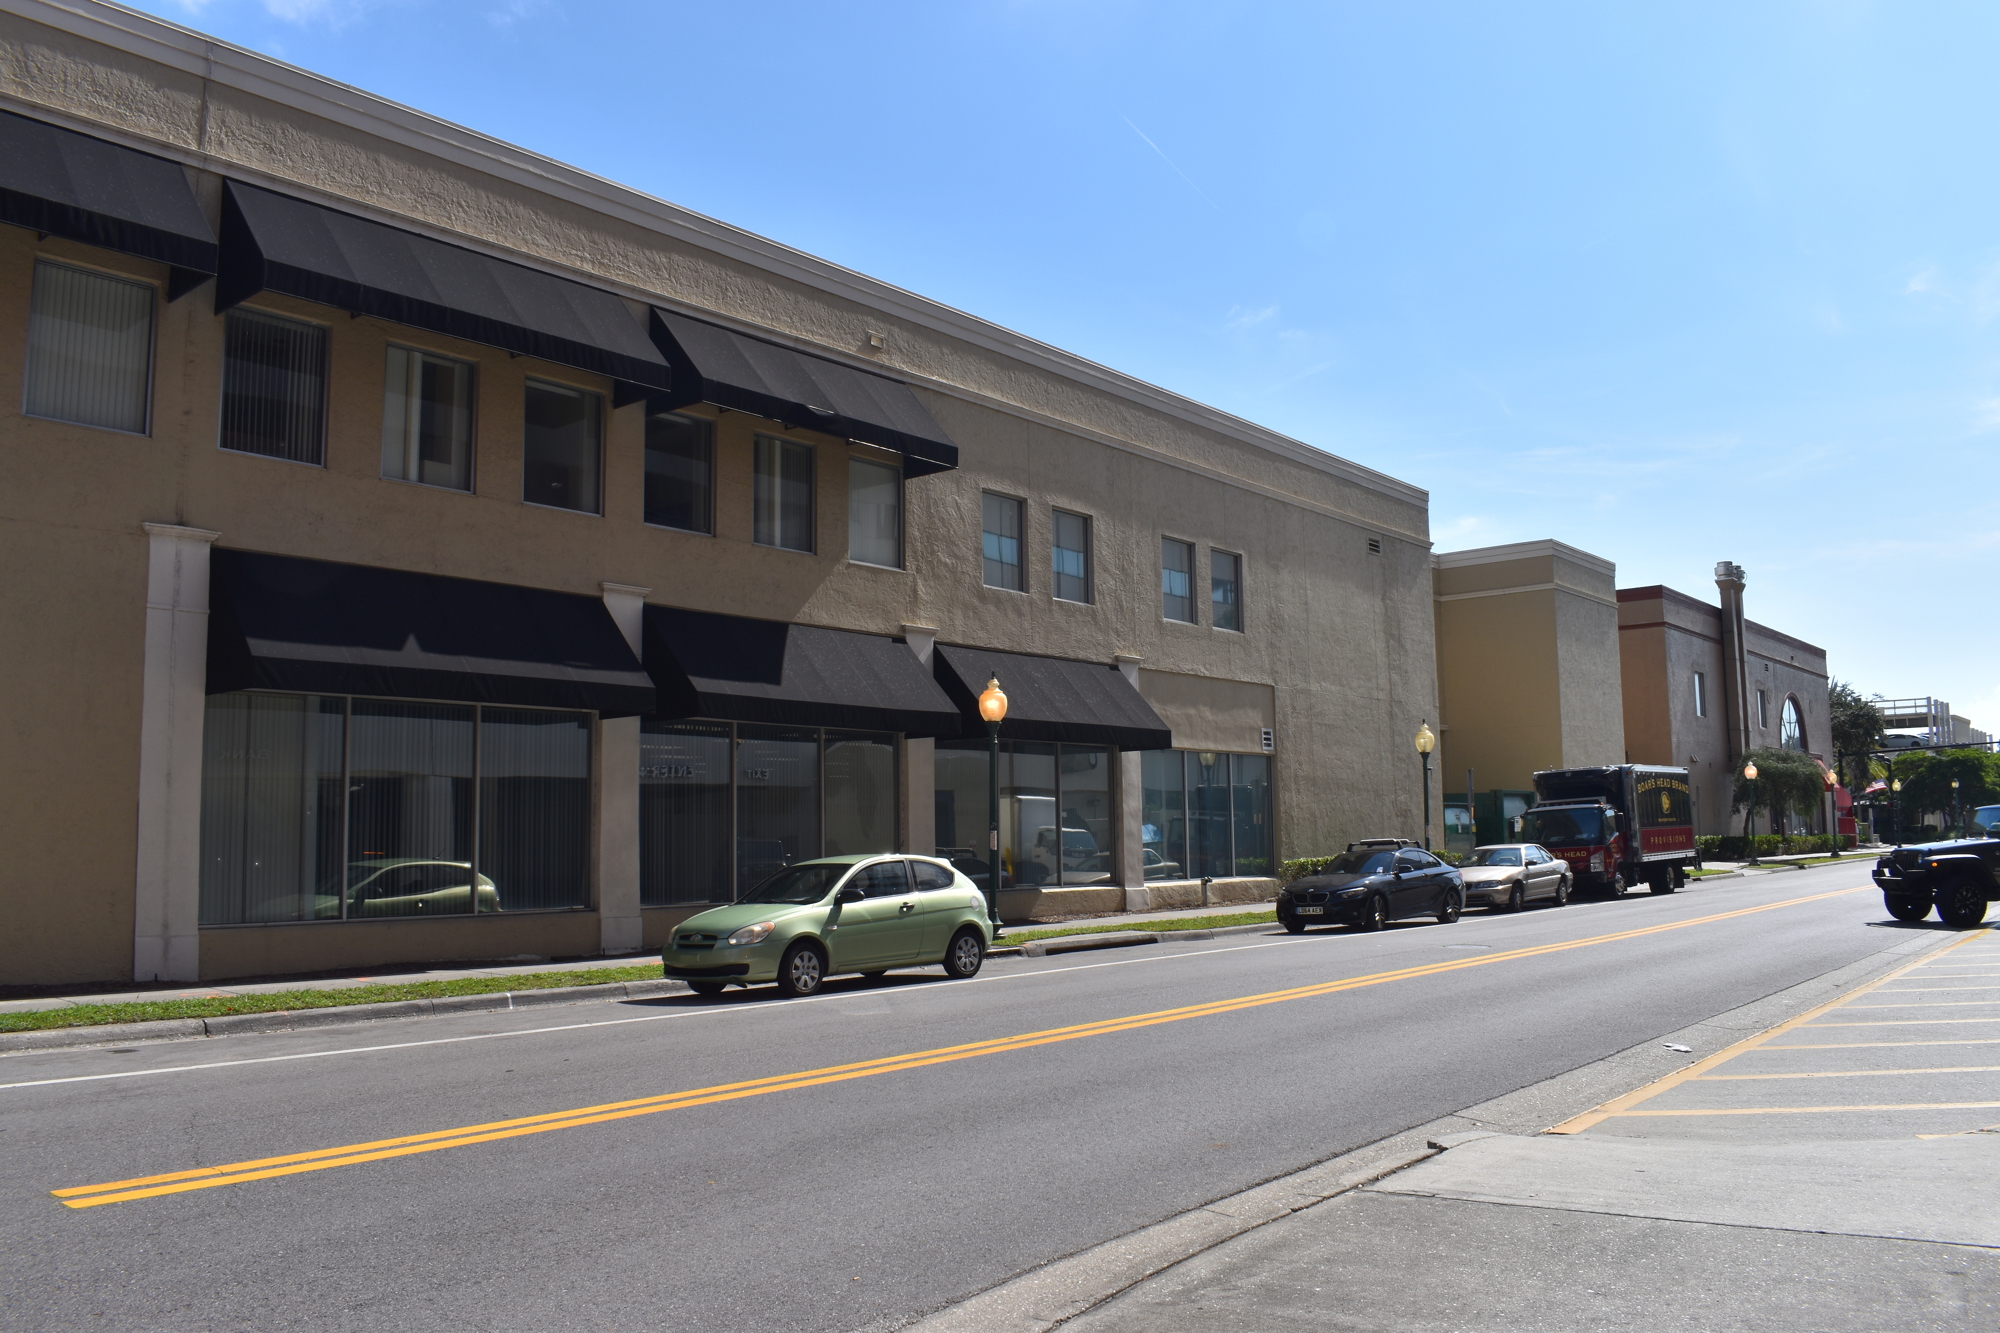 Belpointe REIT plans to develop apartments, new office space and parking at the Main Plaza complex.